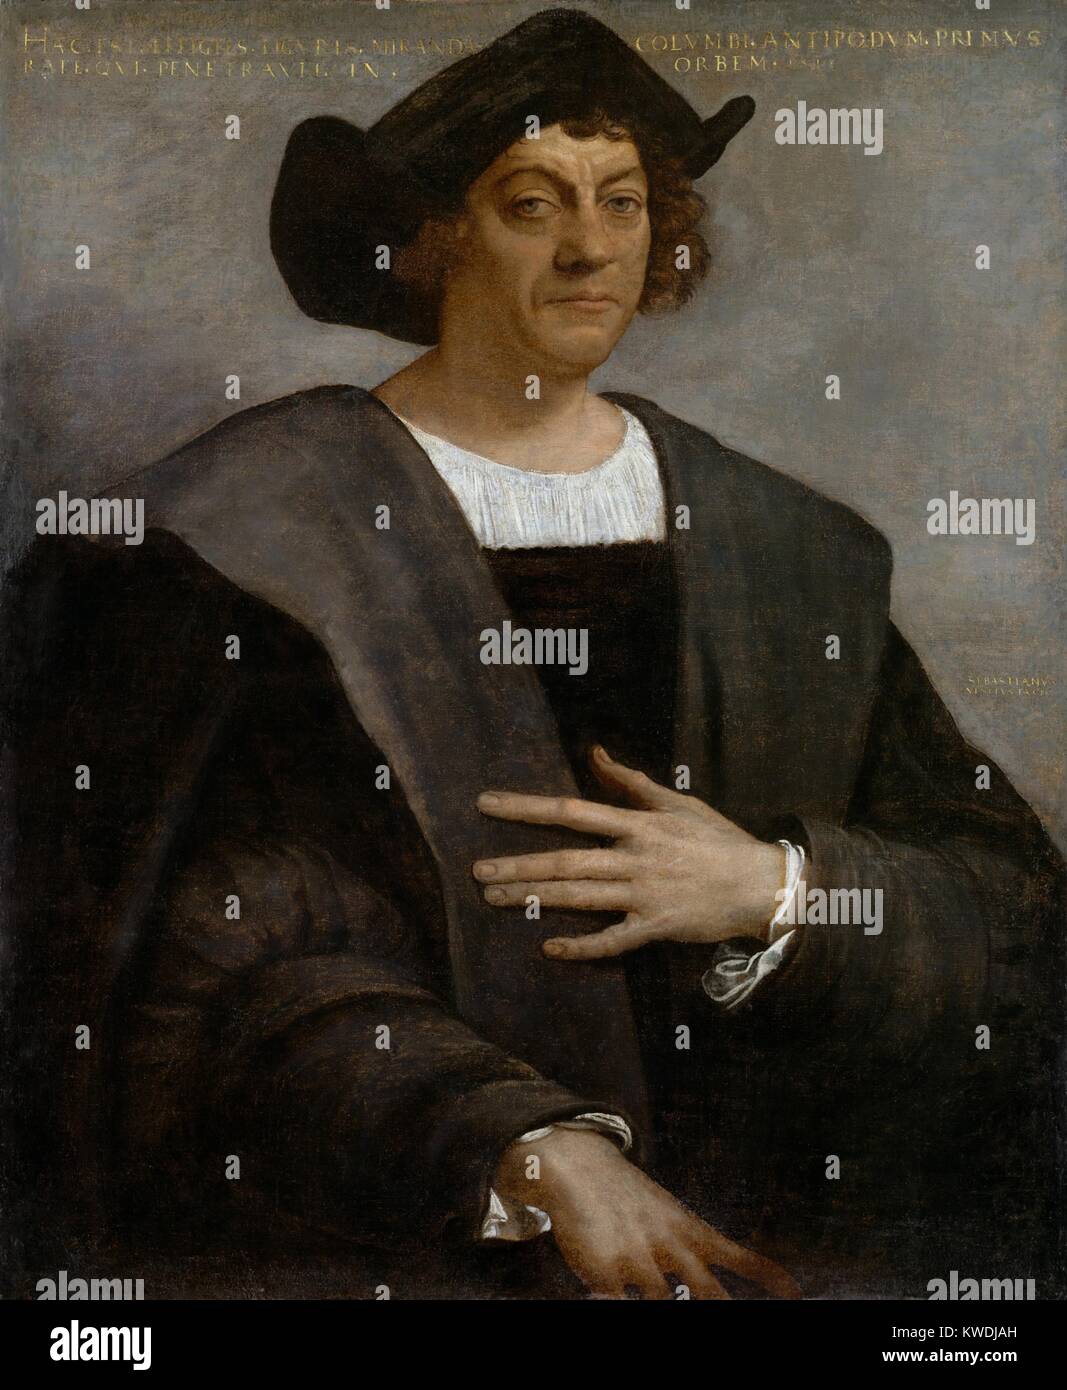 CHRISTOPHER COLUMBUS, by Sebastiano del Piombo, 1519, Italian painting, oil on canvas. The inscription stating the sitter as Columbus was probably added after the painting was made and identification of the sitter is debated. The link to Columbus was strengthened when Theodor de Bry published an engraved portrait of Columbus based on this painting (BSLOC 2017 10 110) Stock Photo